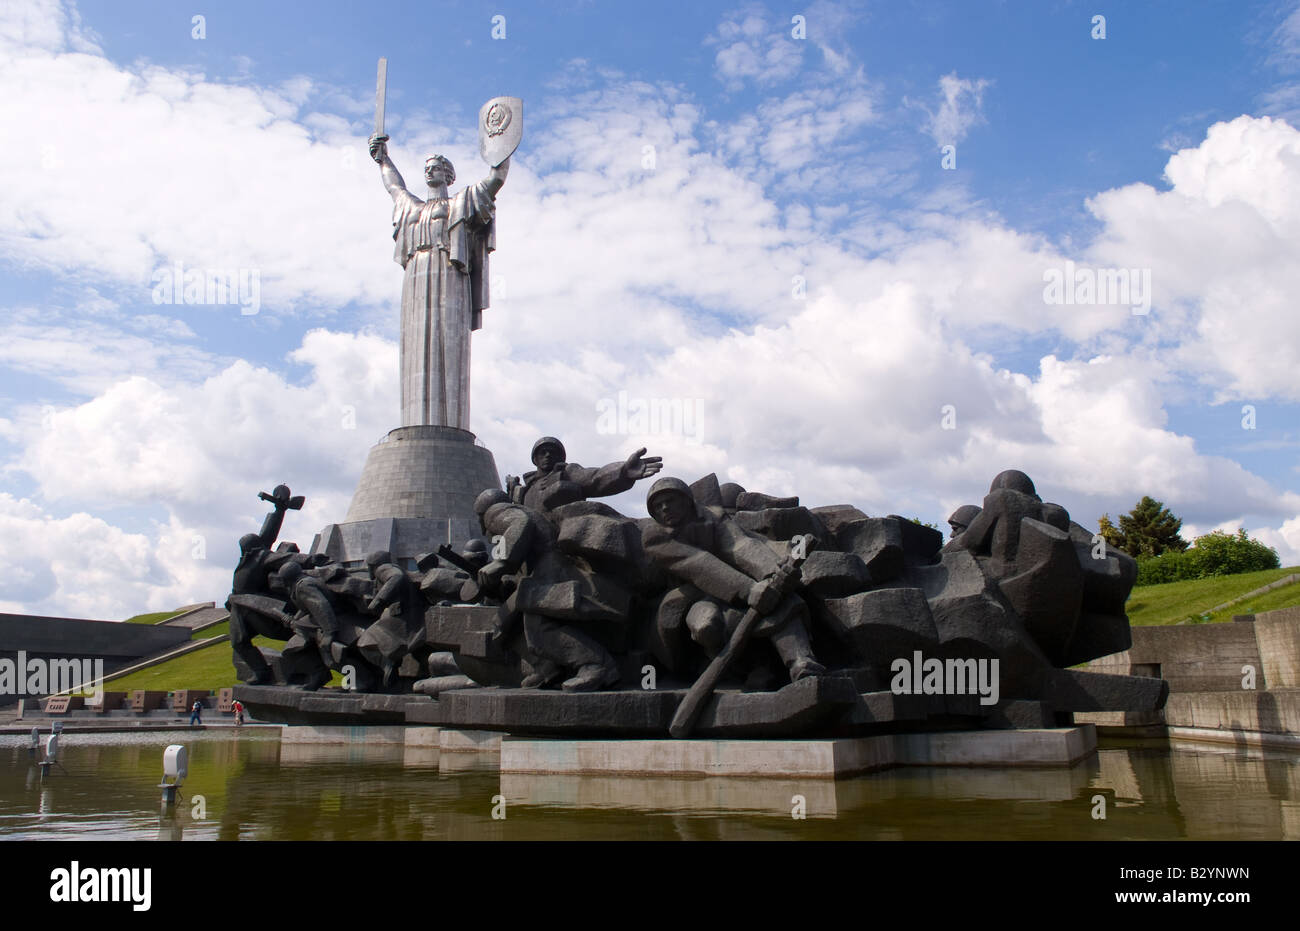 Famous statue of Defense of the Motherland and war monuments in Kiev Ukraine and is known as the stell wench to locals Stock Photo